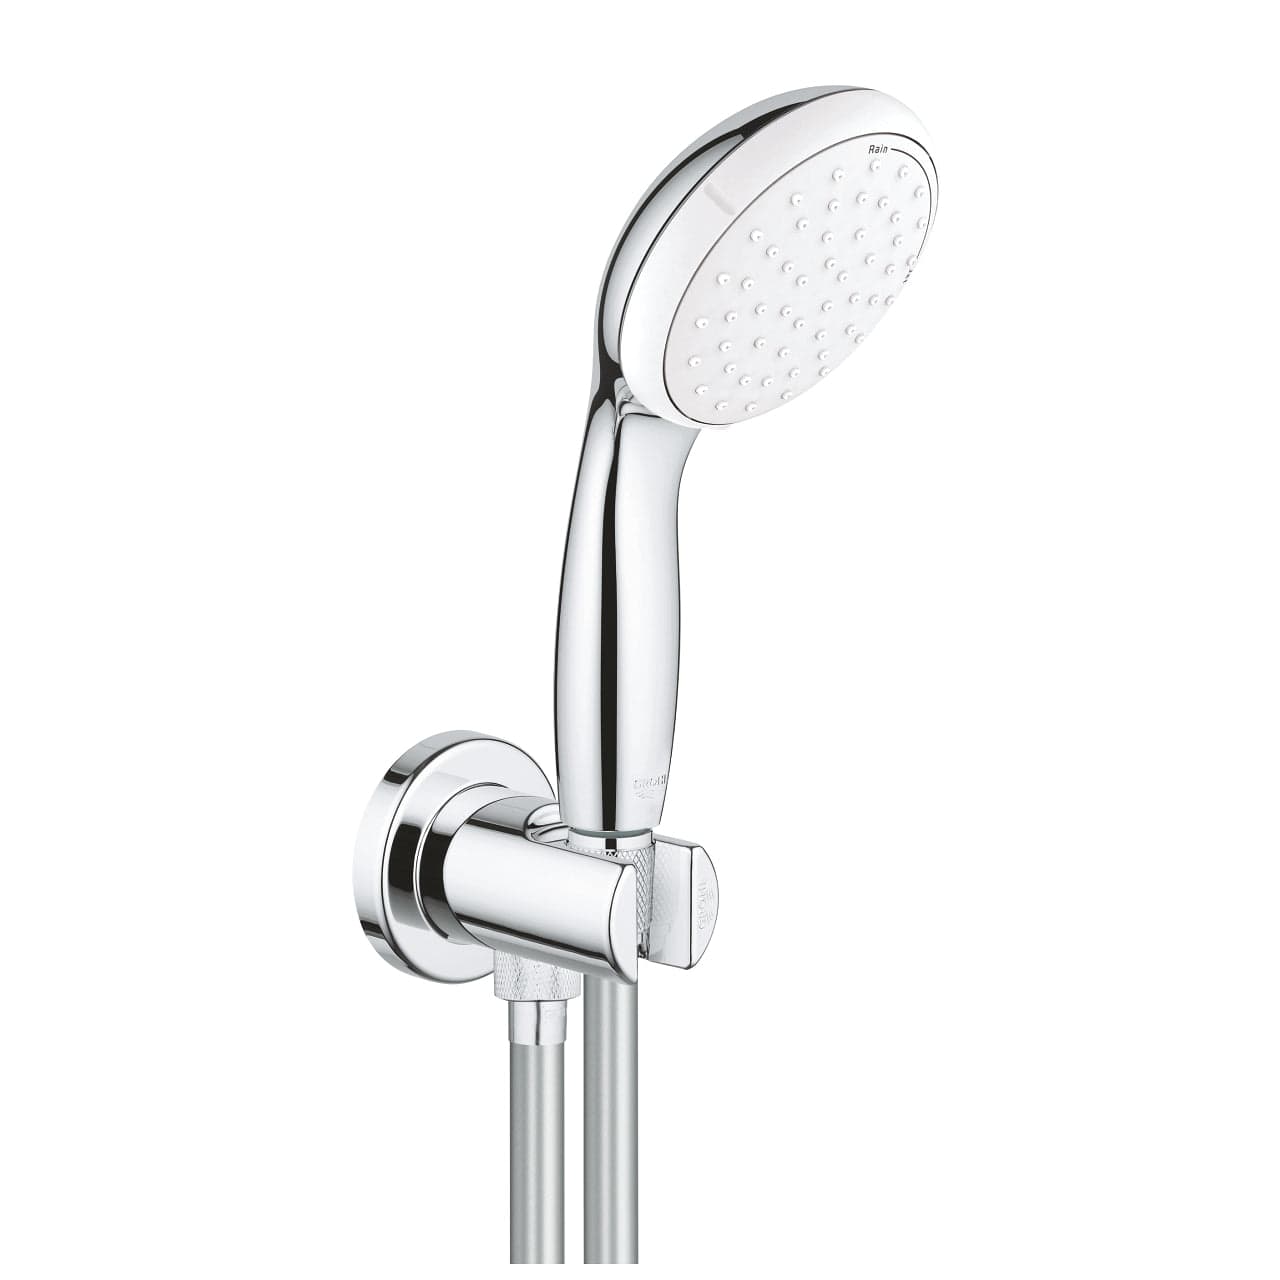 Grohe Tempesta 100 Wall Holder Shower Handle Set with 2 Sprays, Chrome | Supply Master | Accra, Ghana Shower Set Buy Tools hardware Building materials